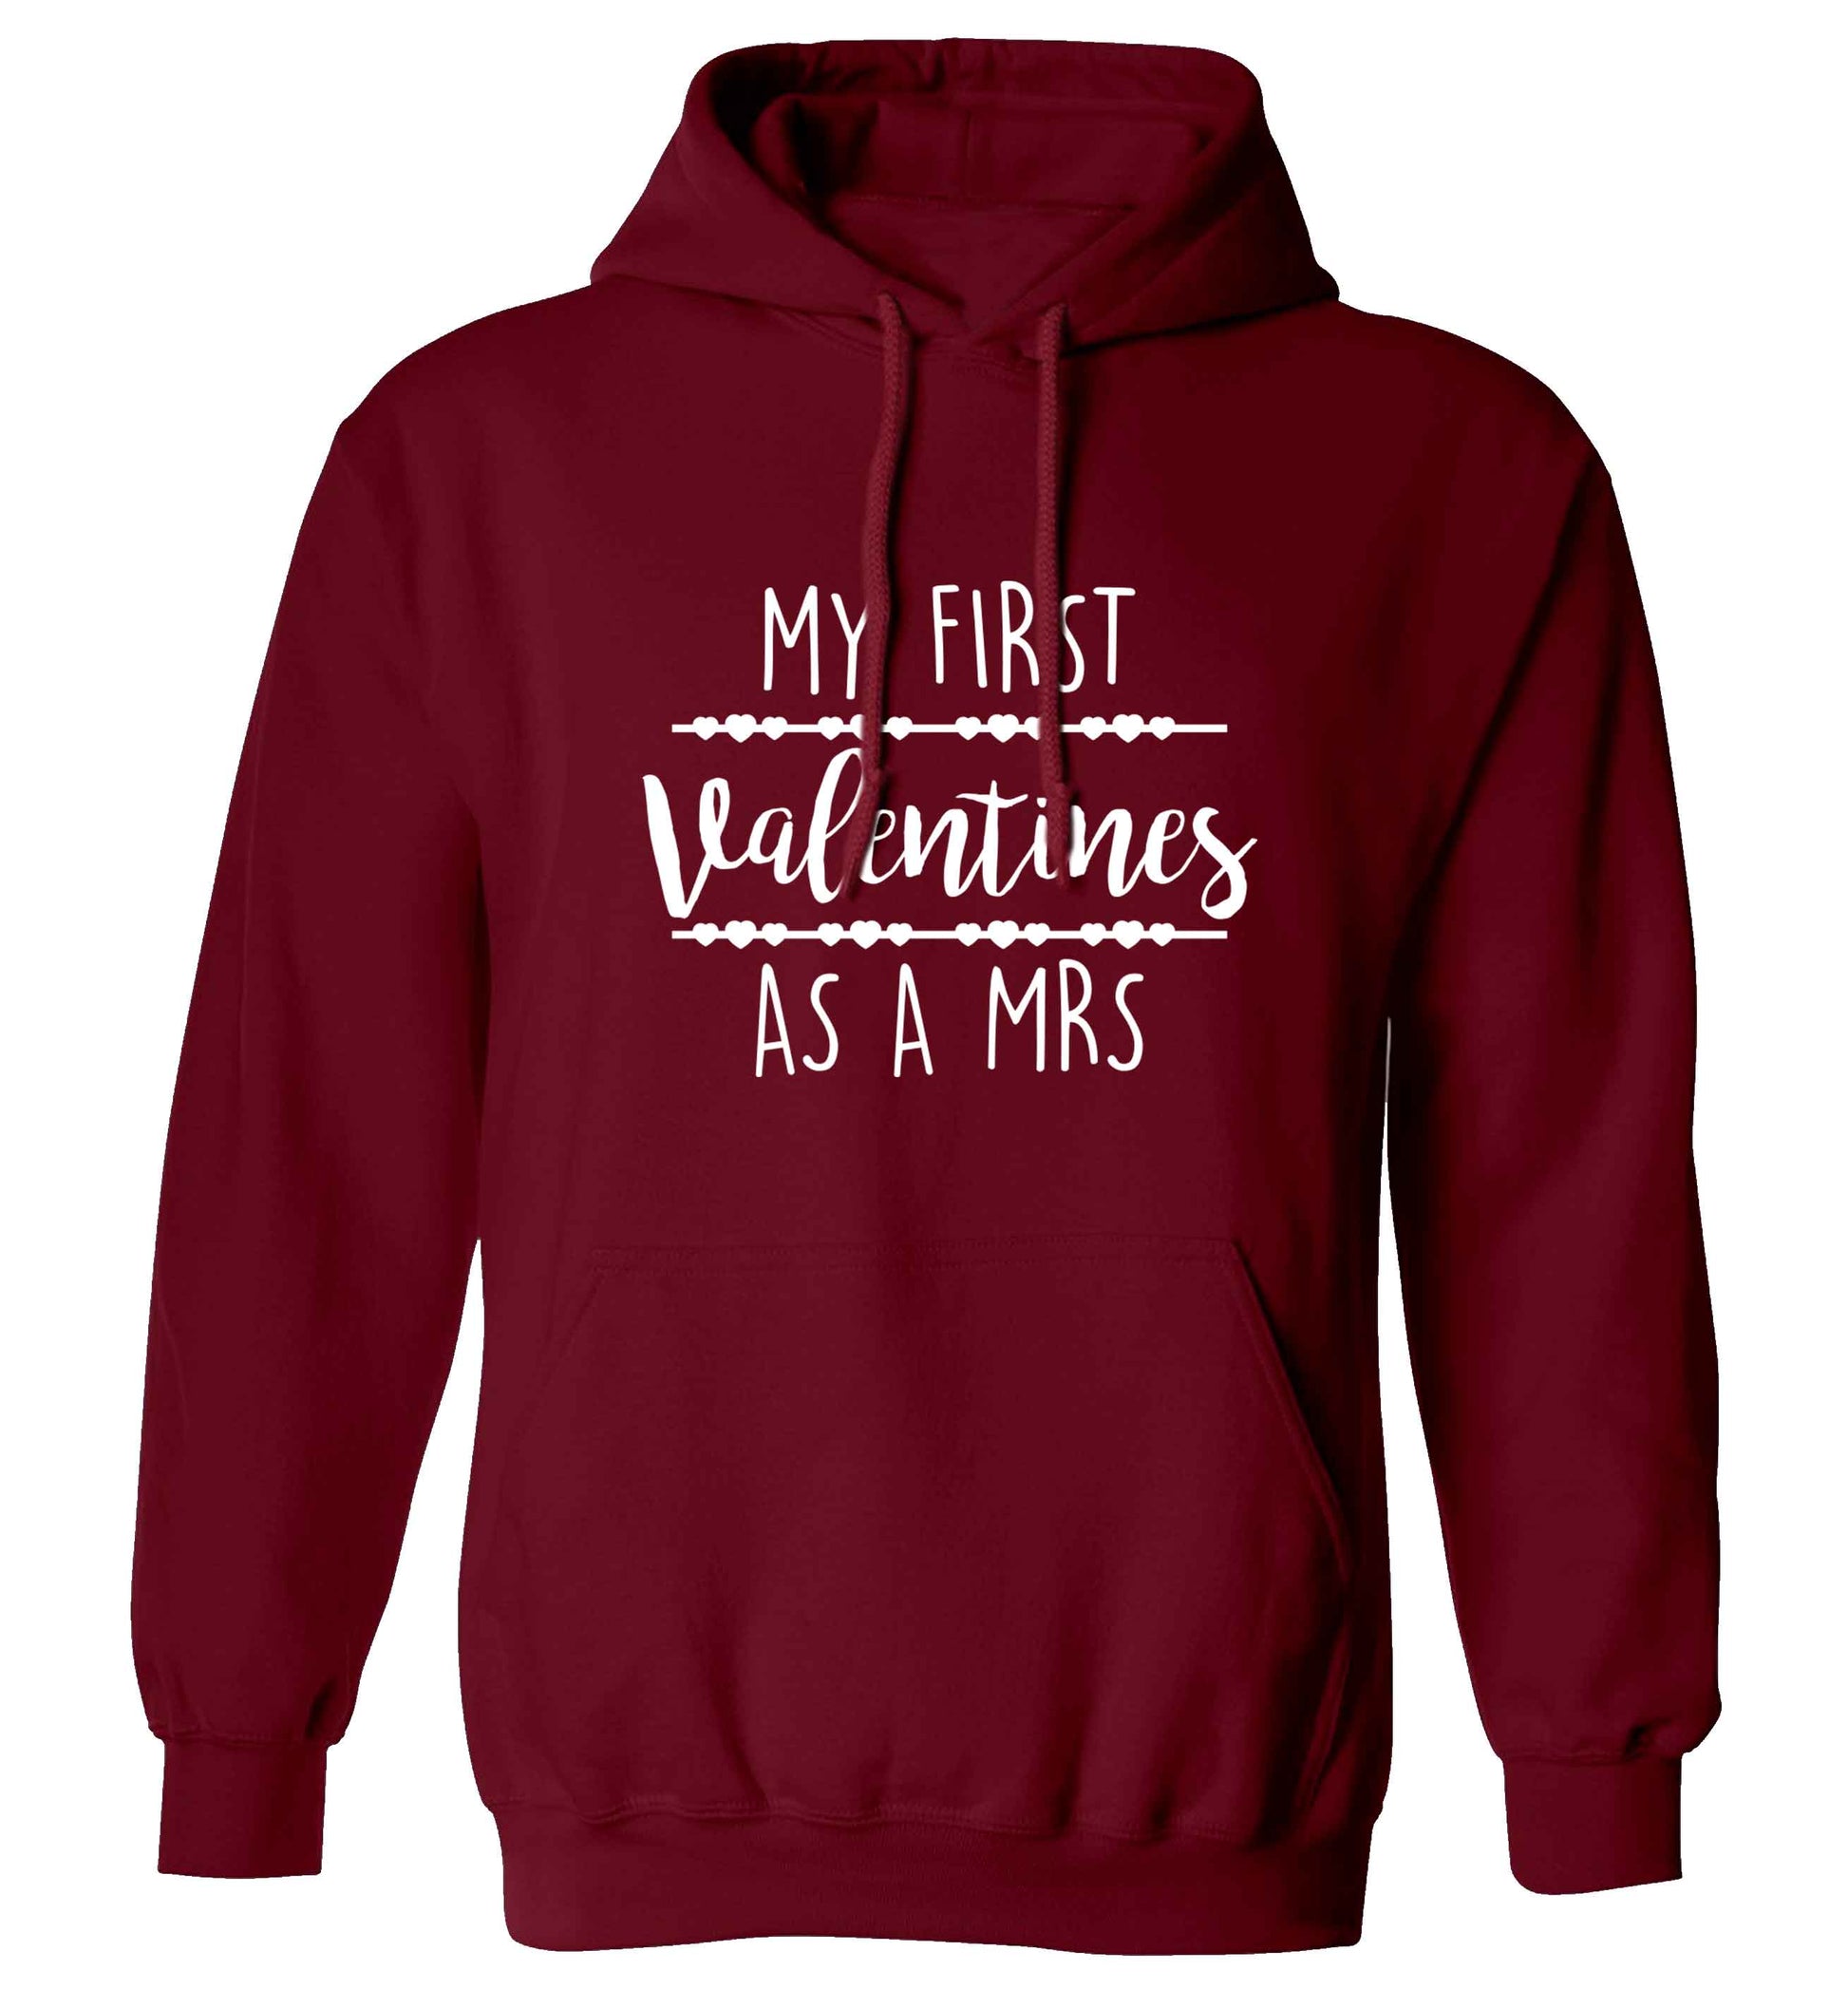 My first valentines as a Mrs adults unisex maroon hoodie 2XL